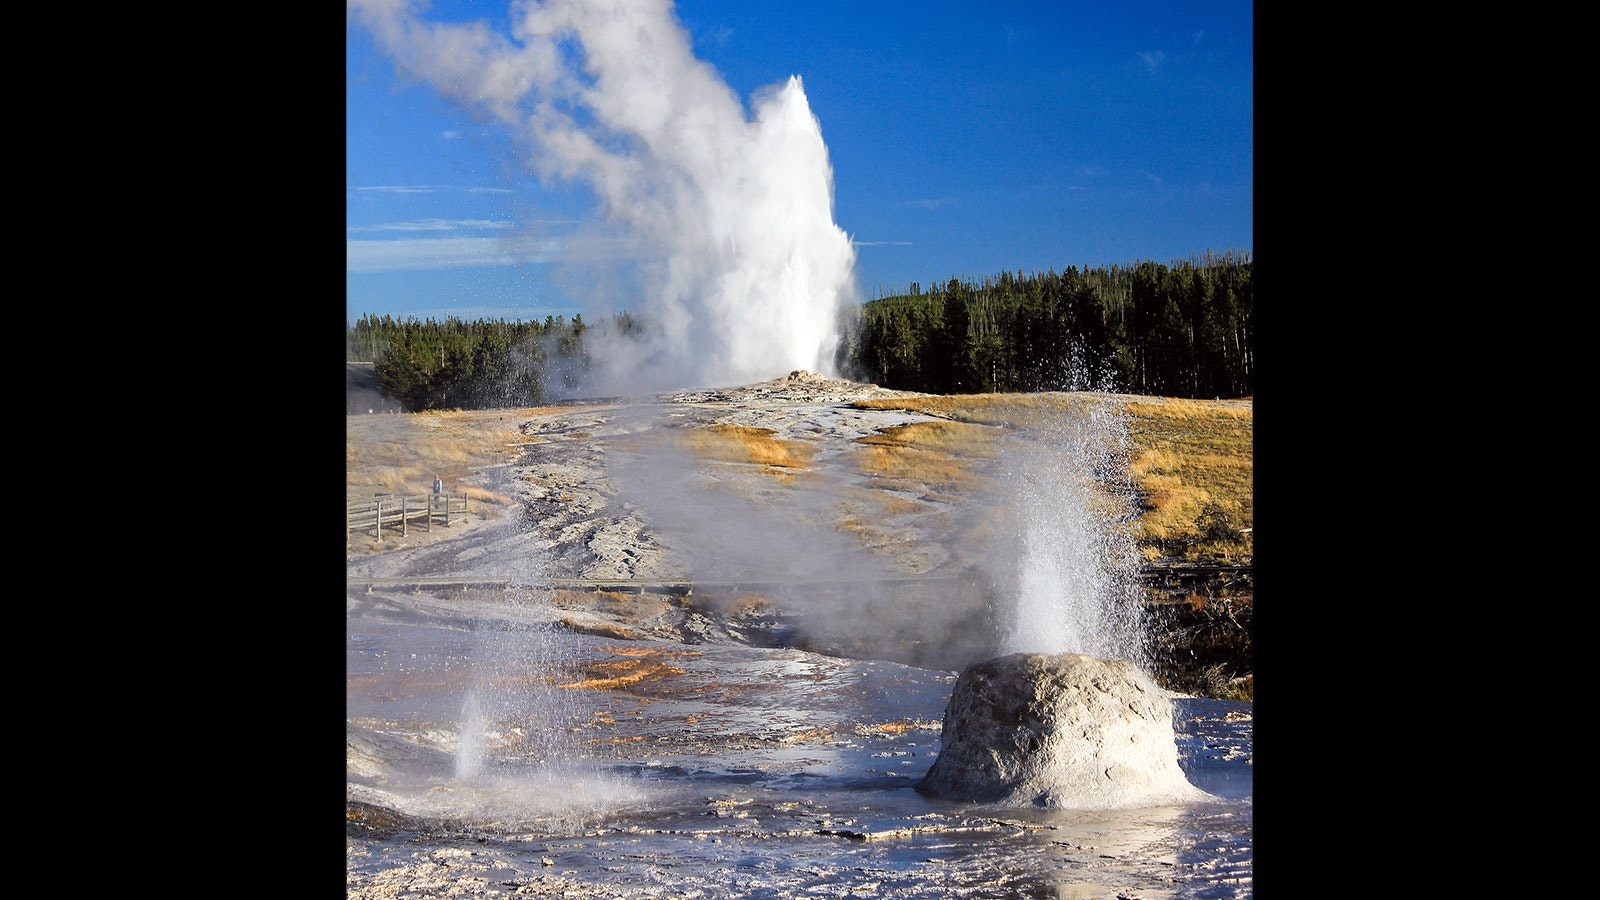 Beehive Geyser and its vent both erupt.